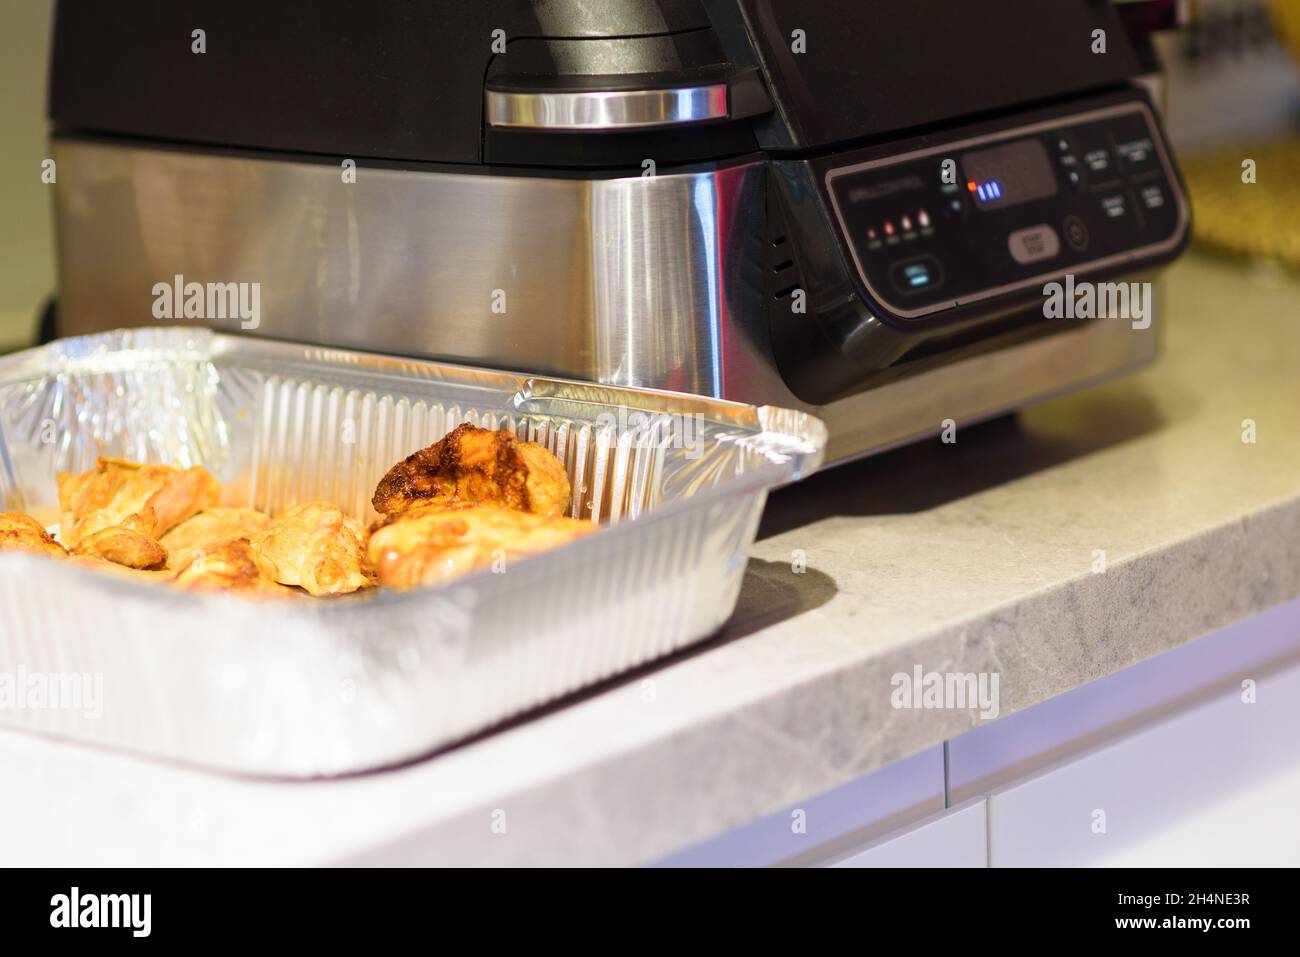 Air Fryer In Kitchen. Black Electric Deep Fryer Side Front View. Selective Focus. Stock Photo